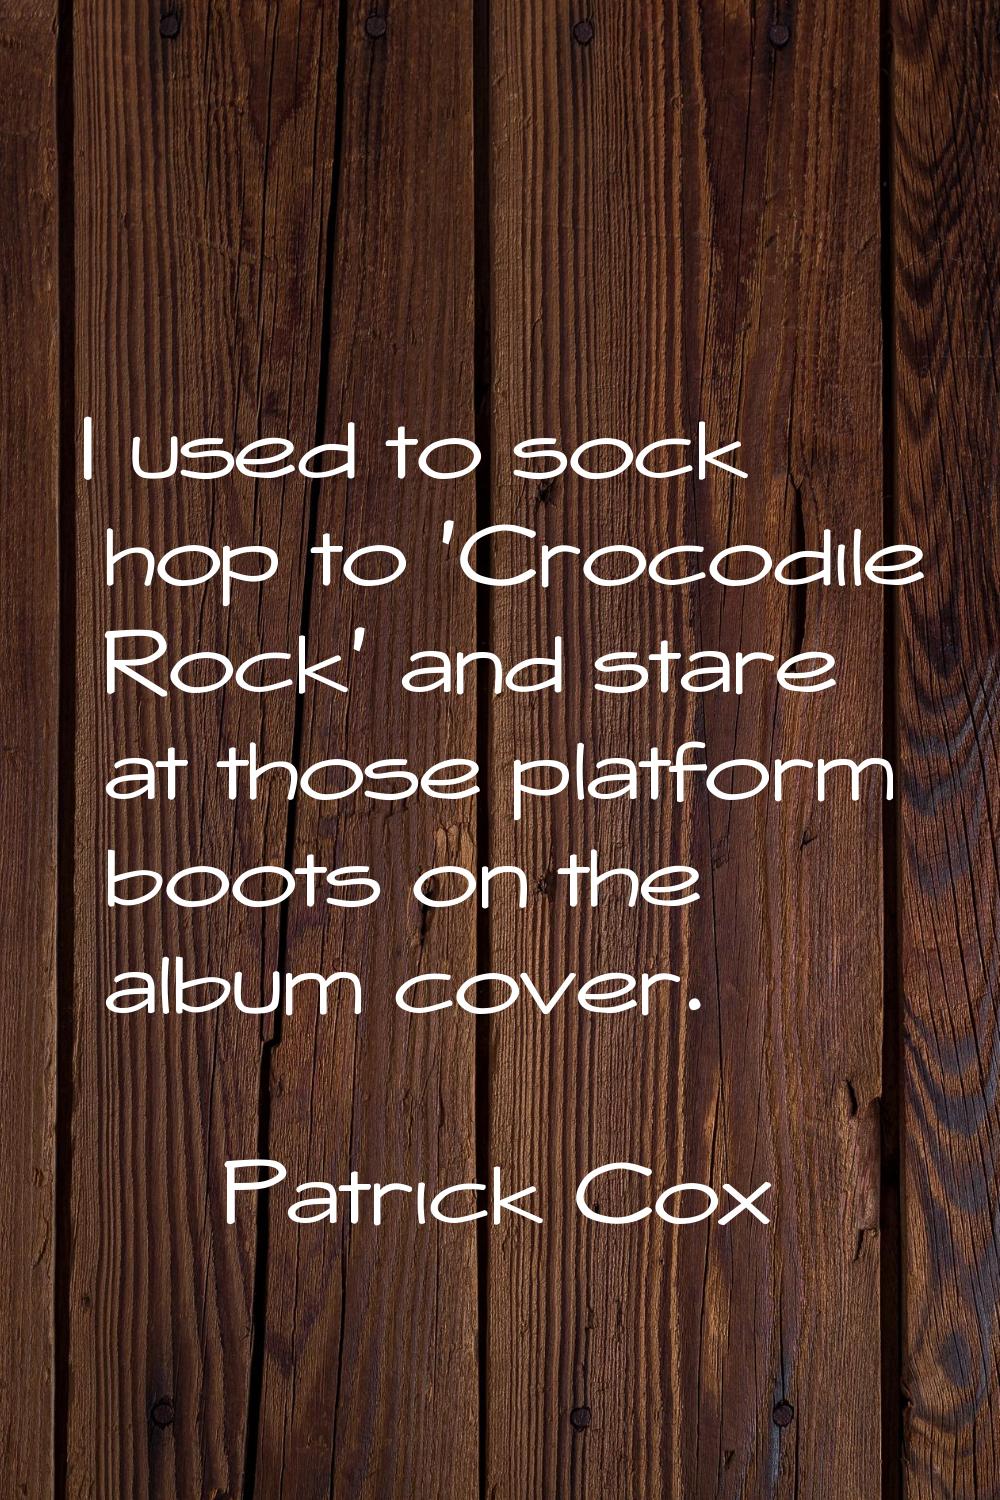 I used to sock hop to 'Crocodile Rock' and stare at those platform boots on the album cover.